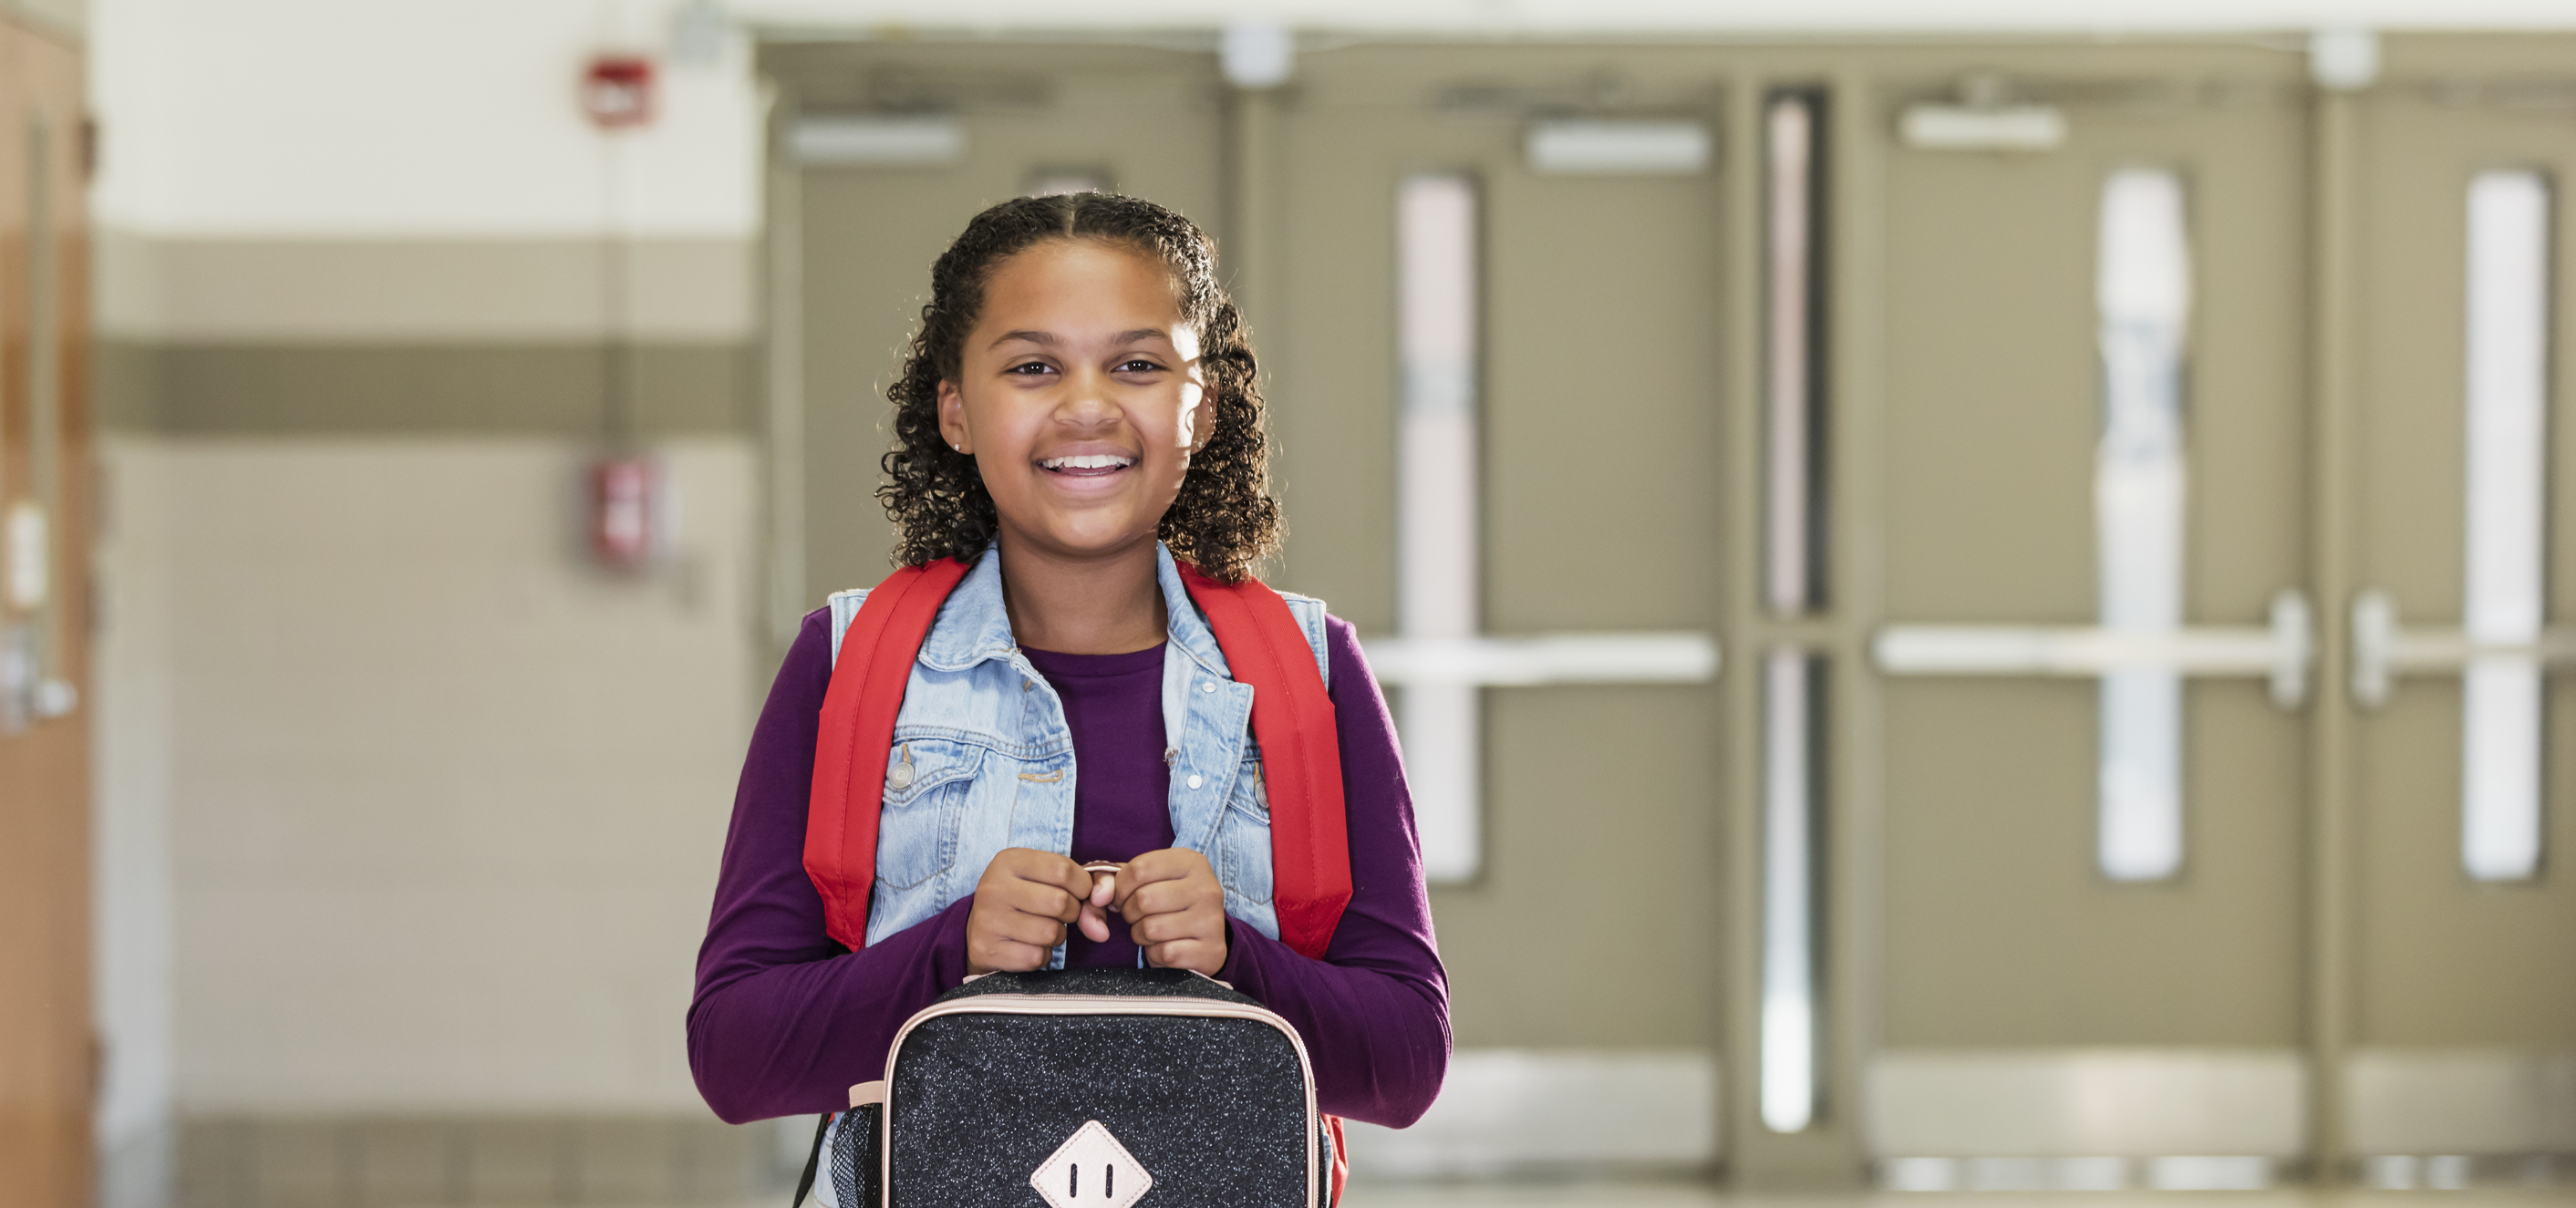 A 10 year old girl is standing ans smiling in the hallway of her elementary school carrying a backpack and lunch box looking very happy, with out of focus emergency doors in the background equipped with panic devices, door closers, and kick plates.